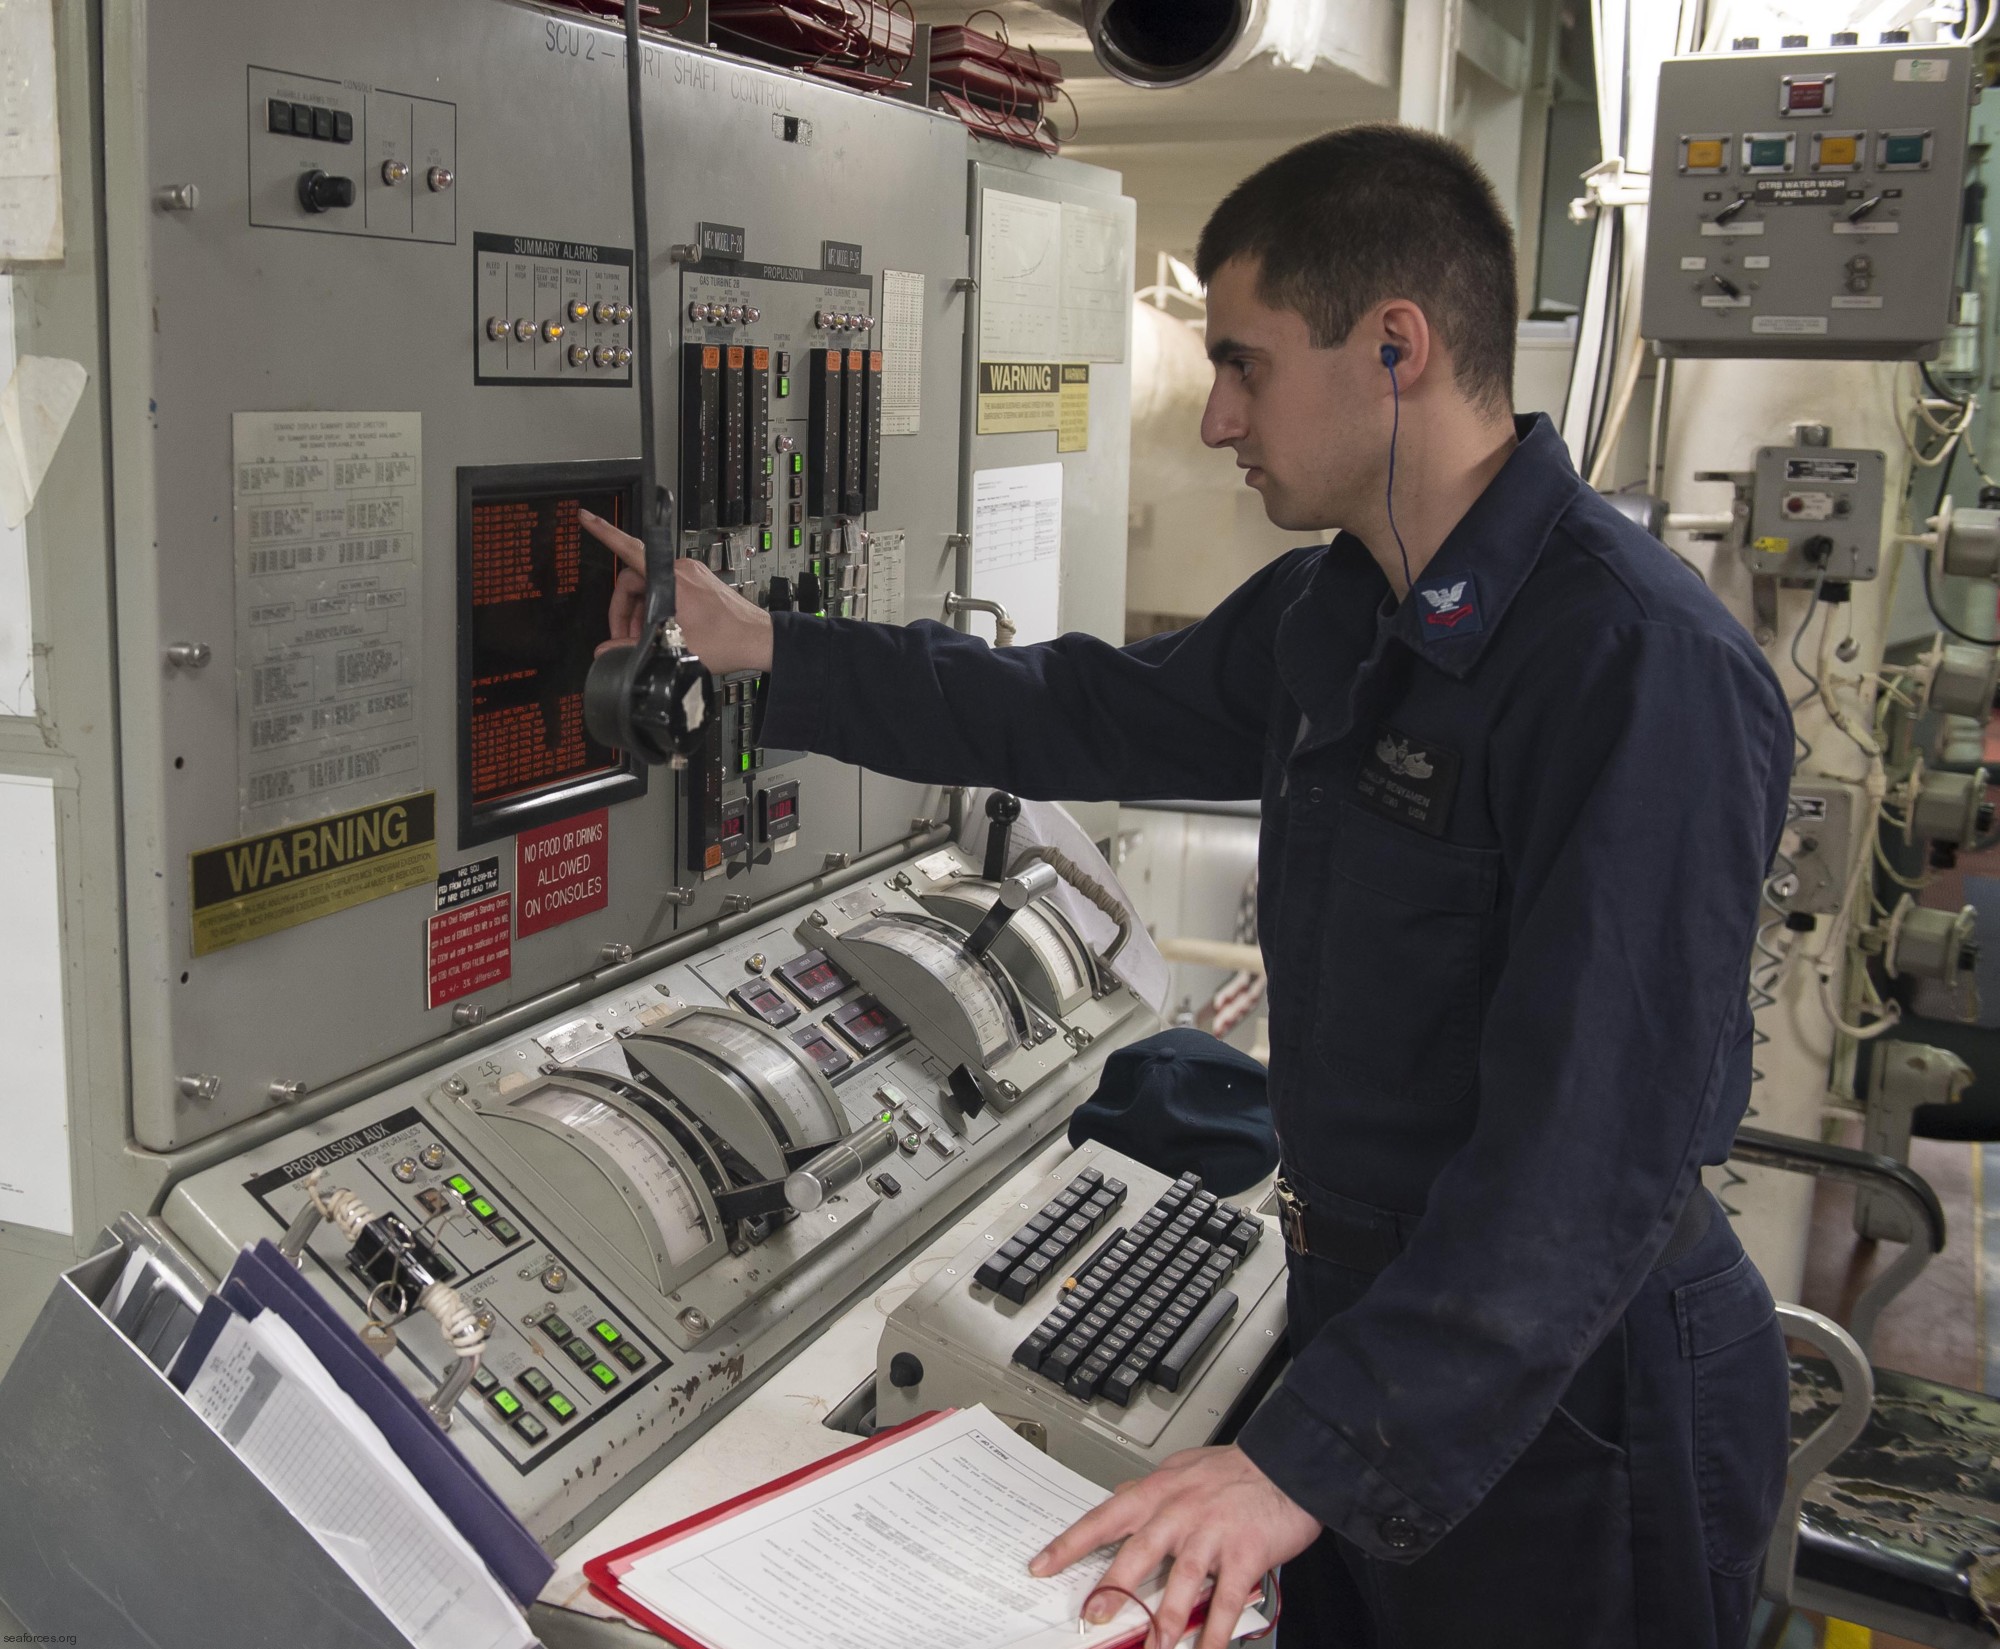 ddg-78 uss porter guided missile destroyer arleigh burke class aegis 135 shaft control console